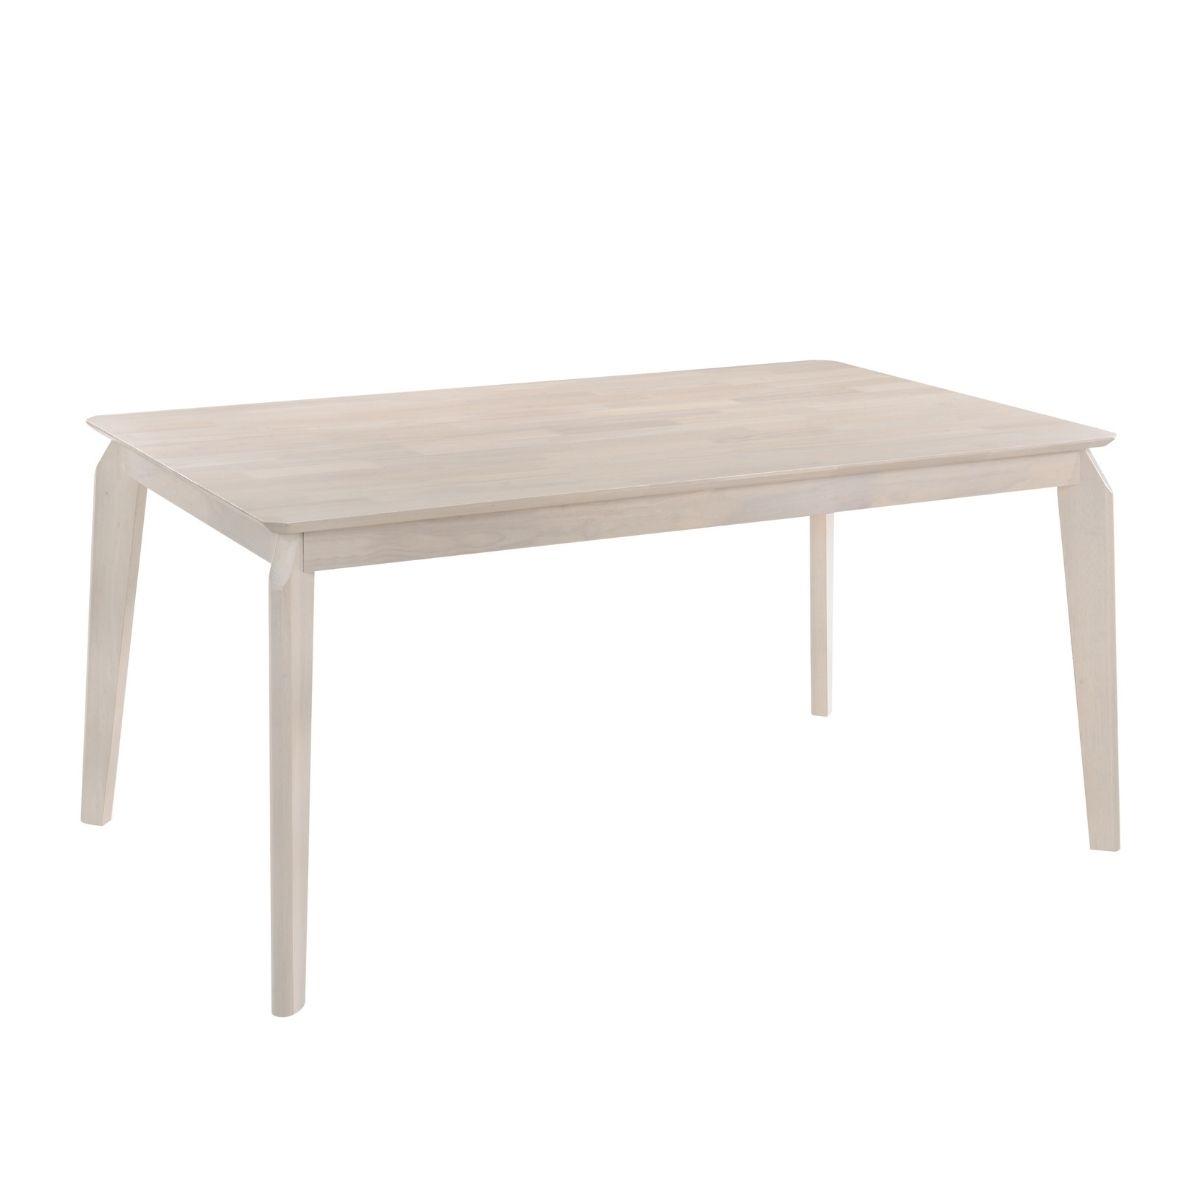 Dining Table 6 Seater Solid Rubberwood in White Washed